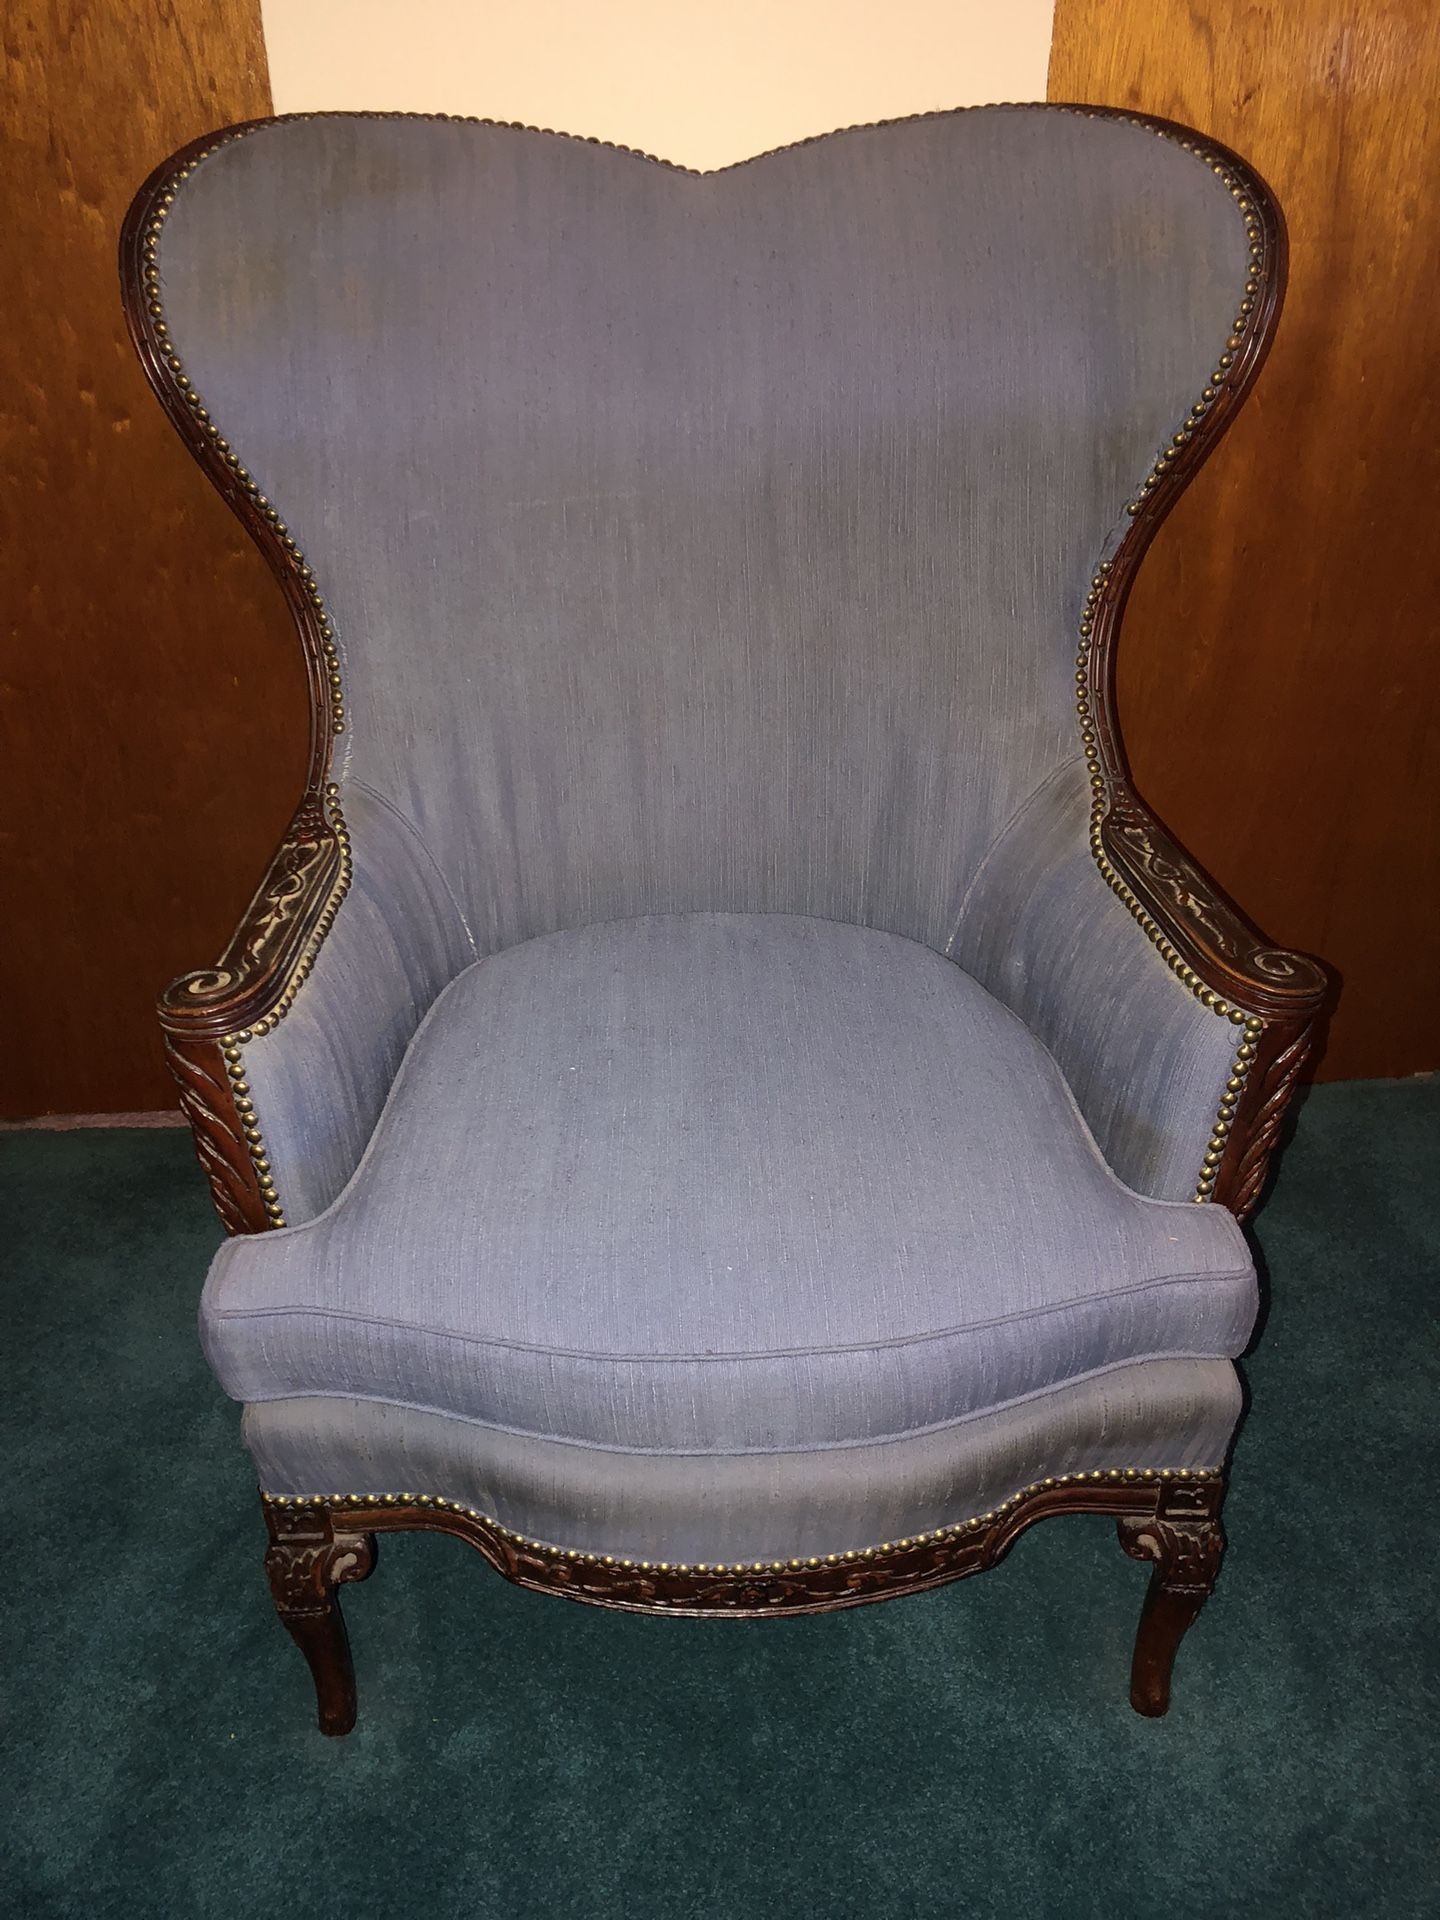 Antique Wingback Chair - 1920s